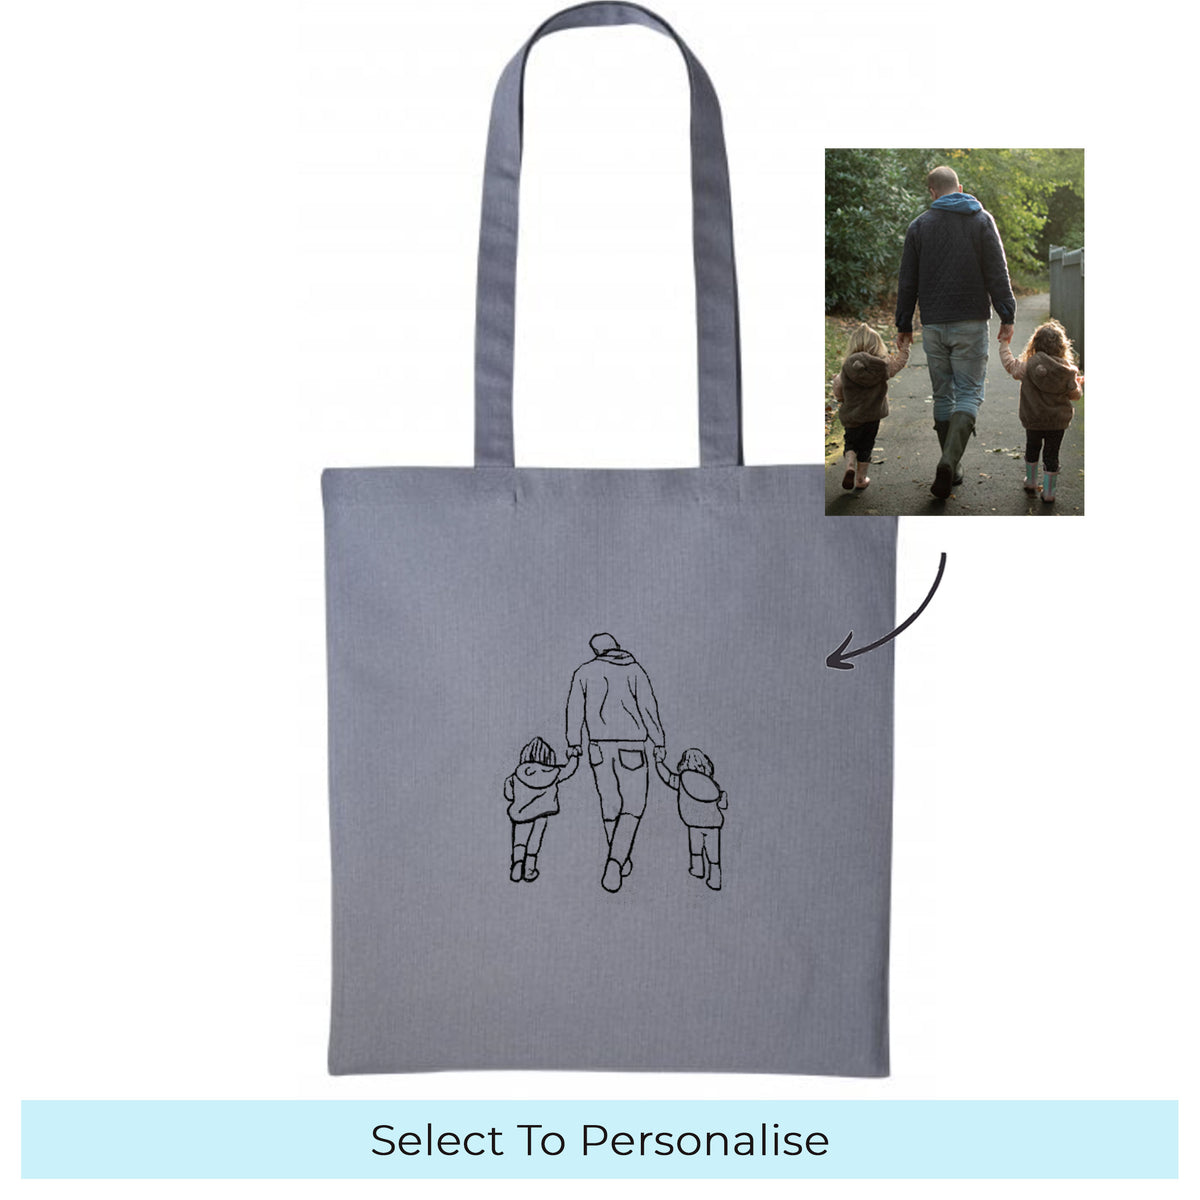 Tote bag personalised photo outline